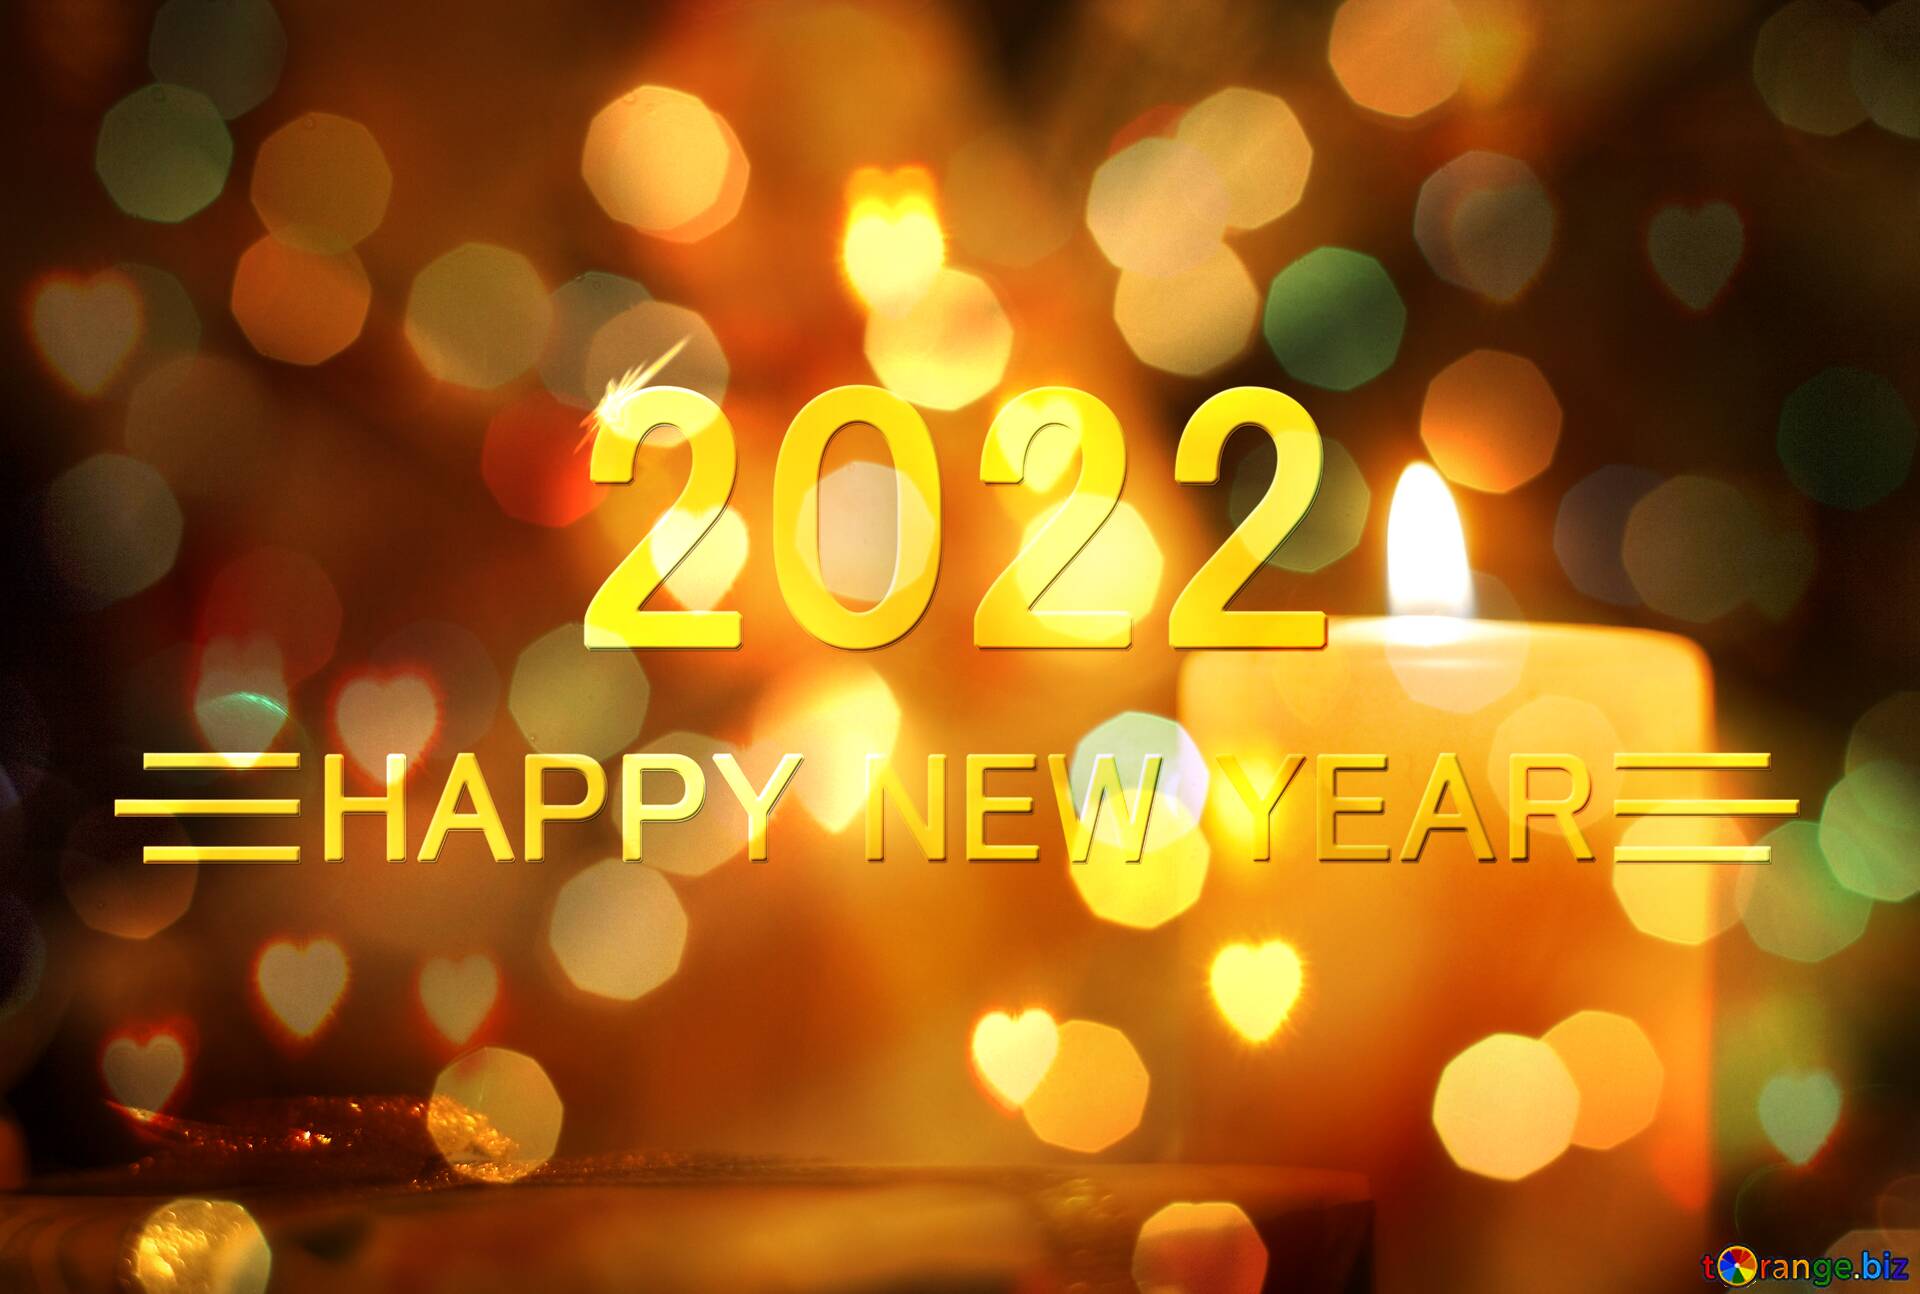 Wallpapers new year with 2022 happy new year 2022 on the desktop